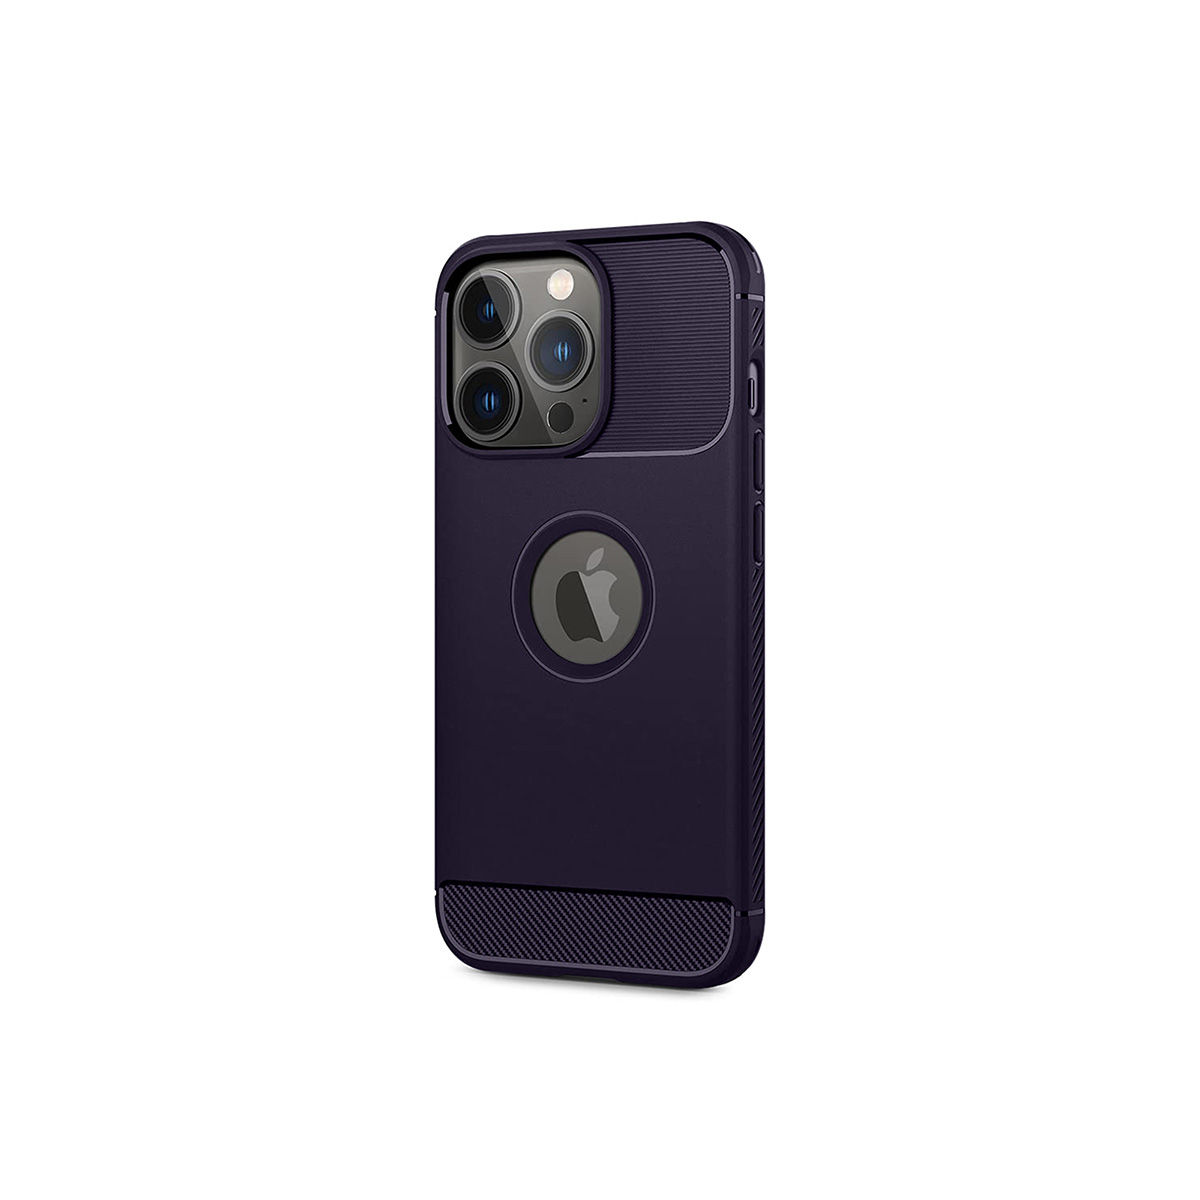 Treemoda Mobile Covers : Buy Treemoda Lavender Solid Silicone Apple Iphone  14 Back Case Online